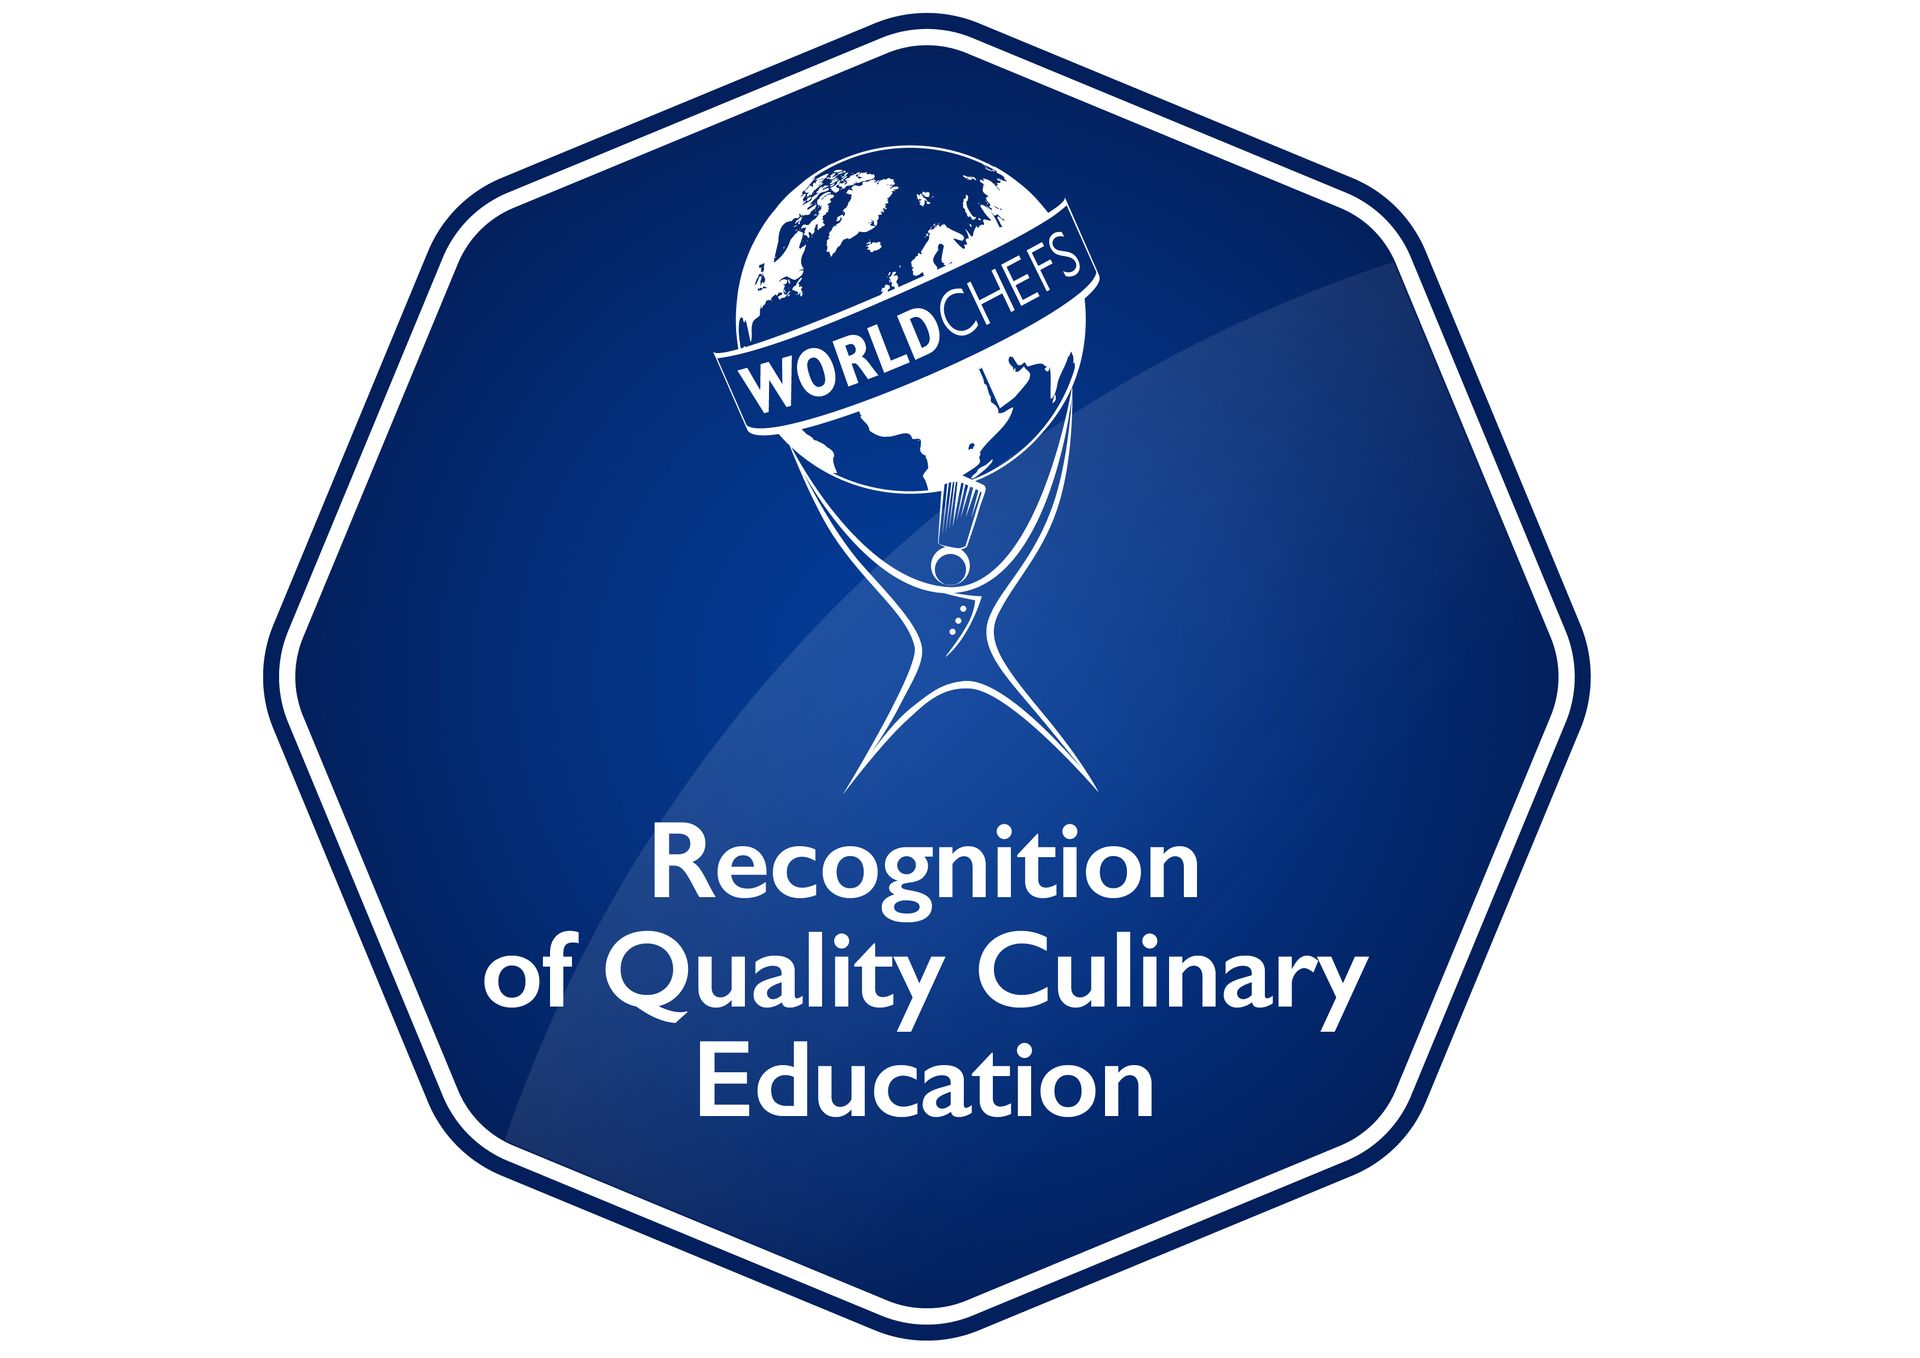 Recognition of Quality Culinary Education